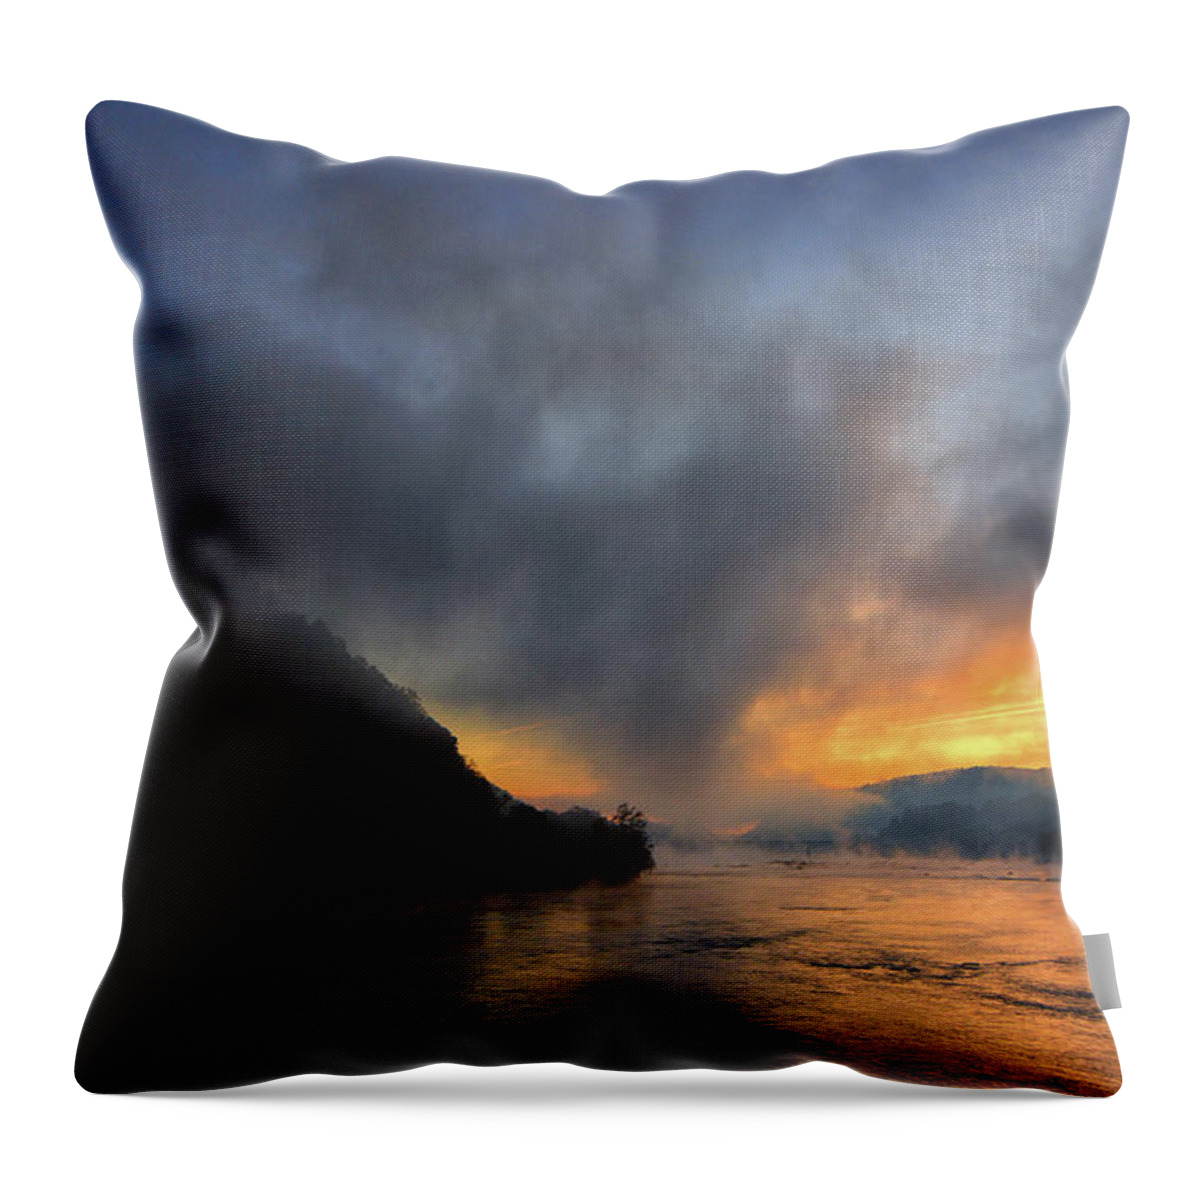 The Point Harpers Ferry At Sunrise Throw Pillow featuring the photograph The Point Harpers Ferry at Sunrise by Raymond Salani III